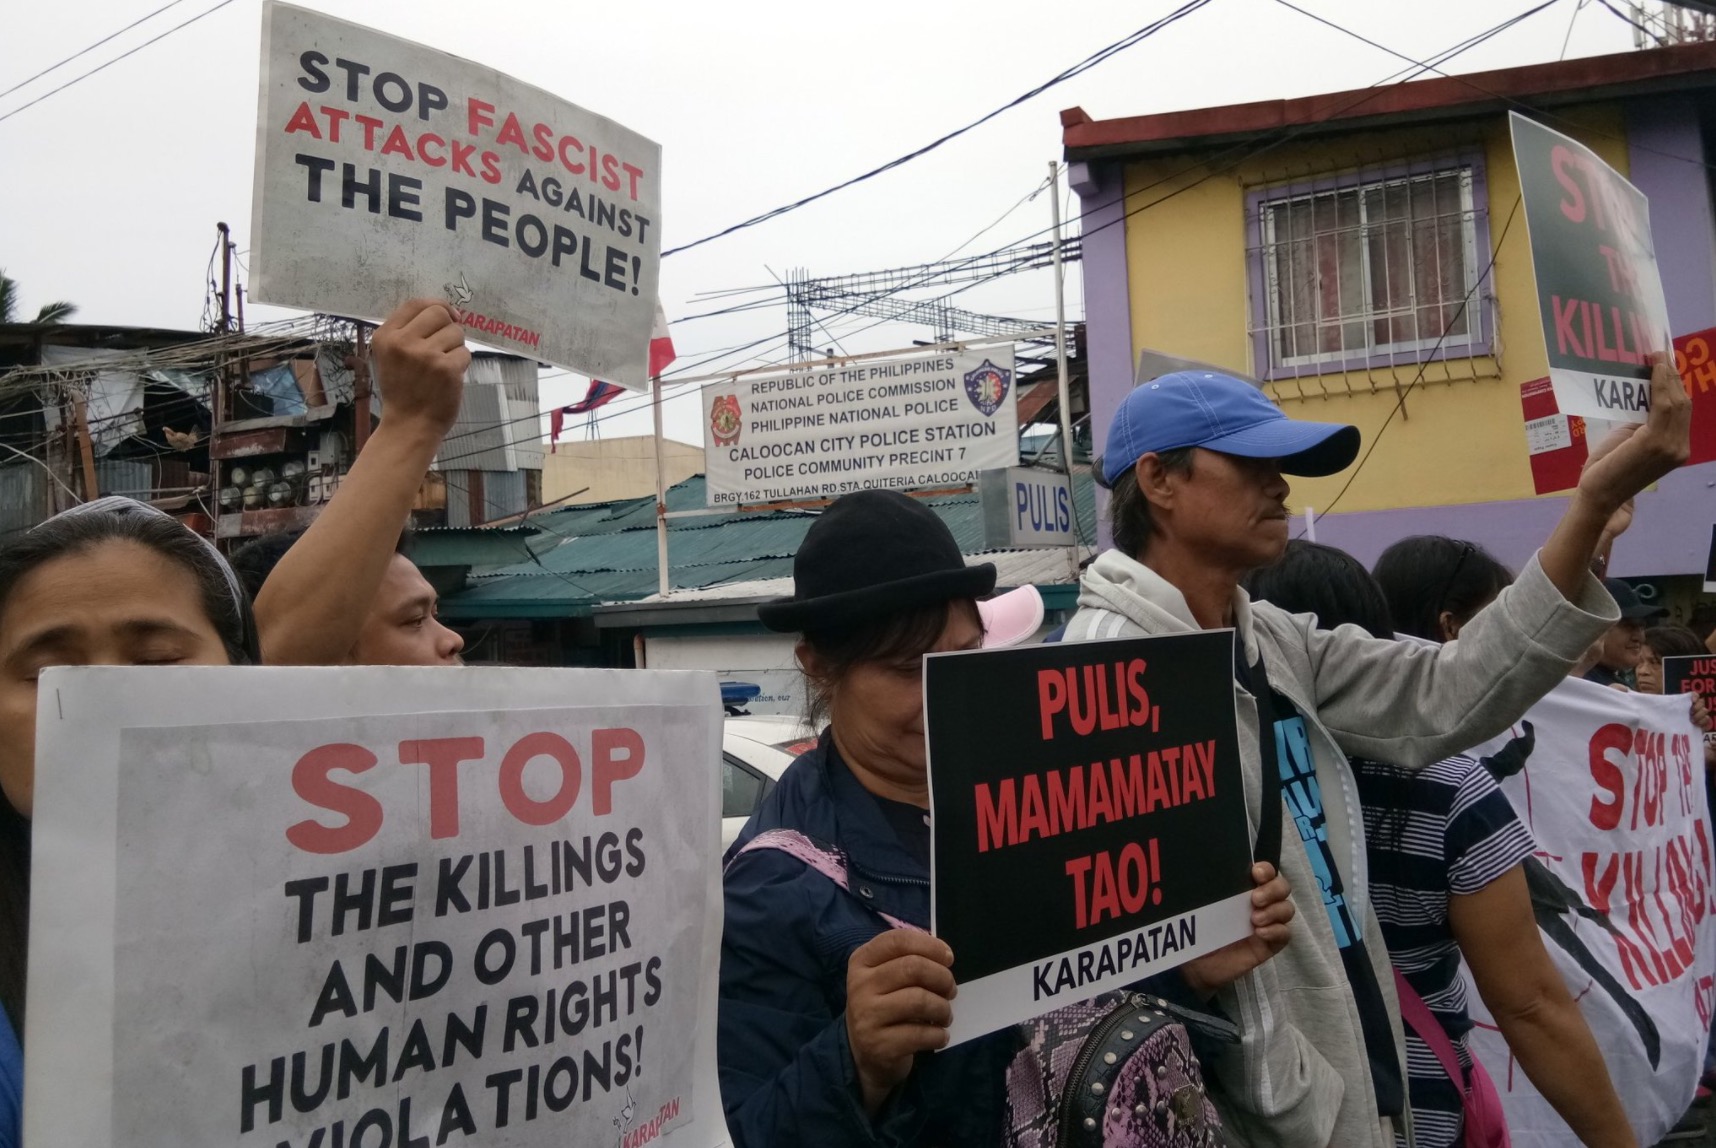 Kian deloa Santos’ funeral procession turns into a mobile protest in front of the Caloocan City Police Station. PHOTO: Twitter/Patrick Quintos for ABS-CBN News